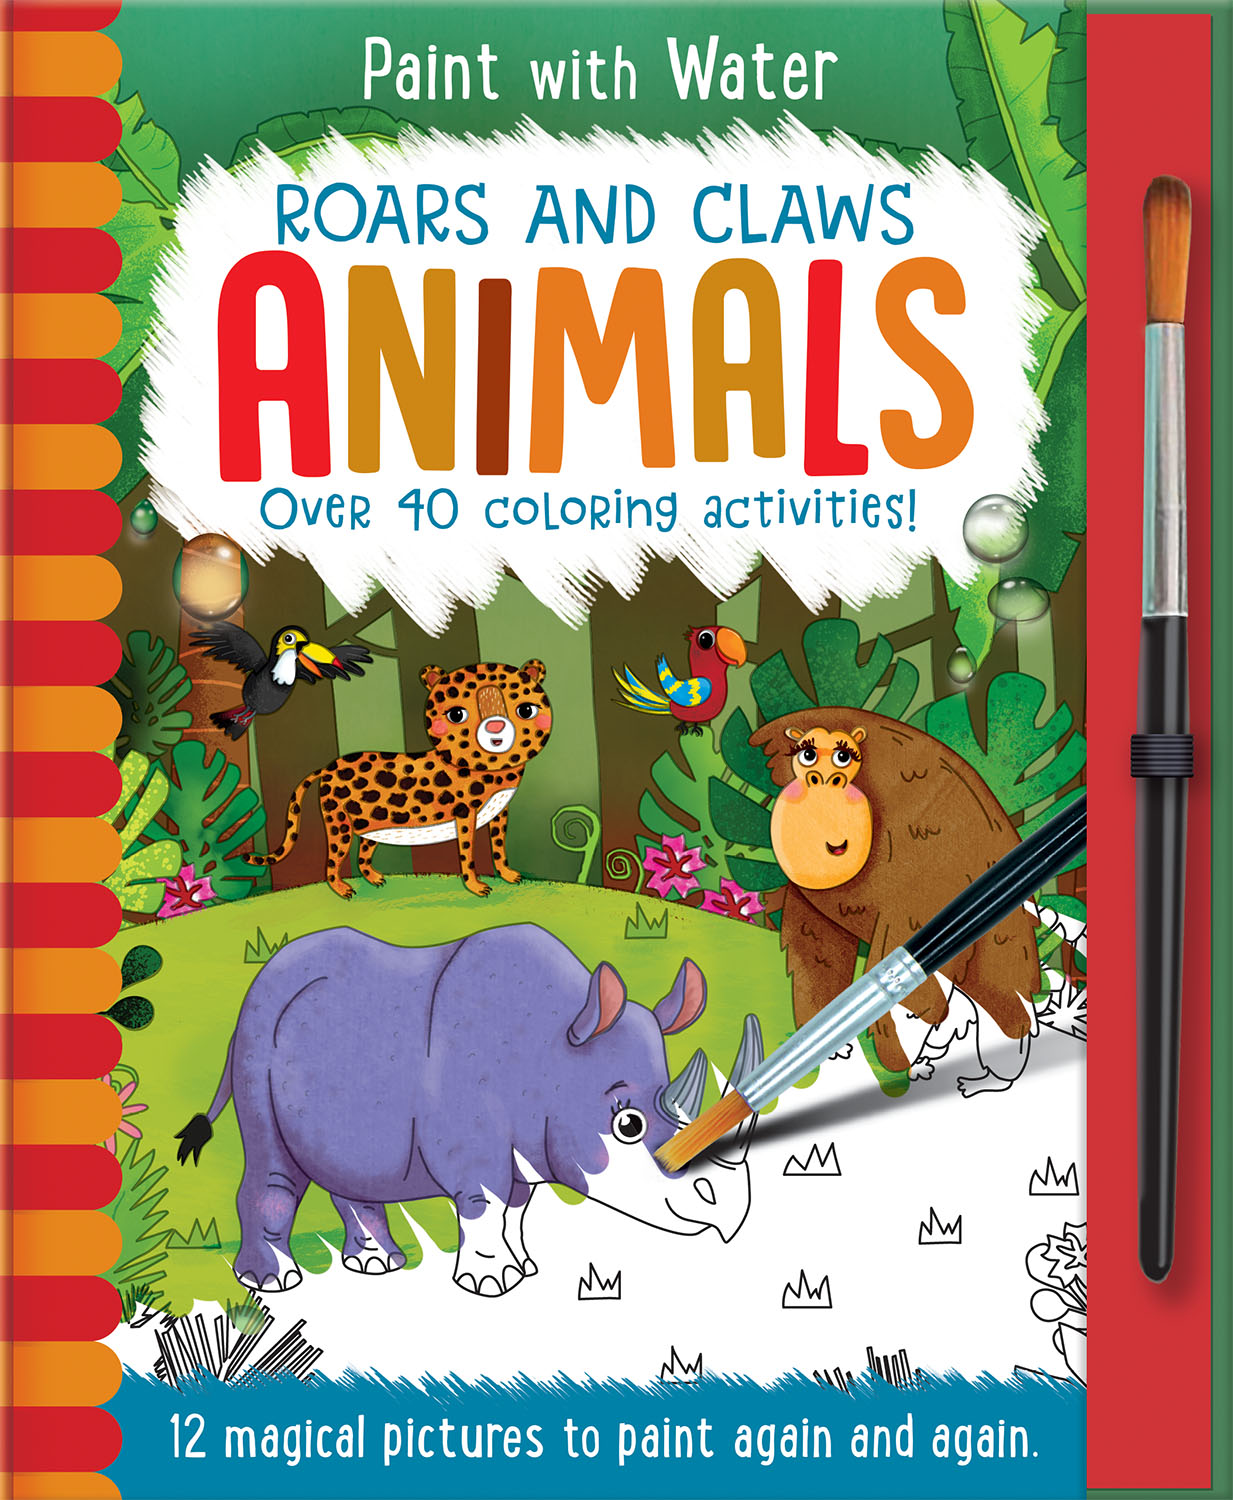 ROARS AND CLAWS - ANIMALS